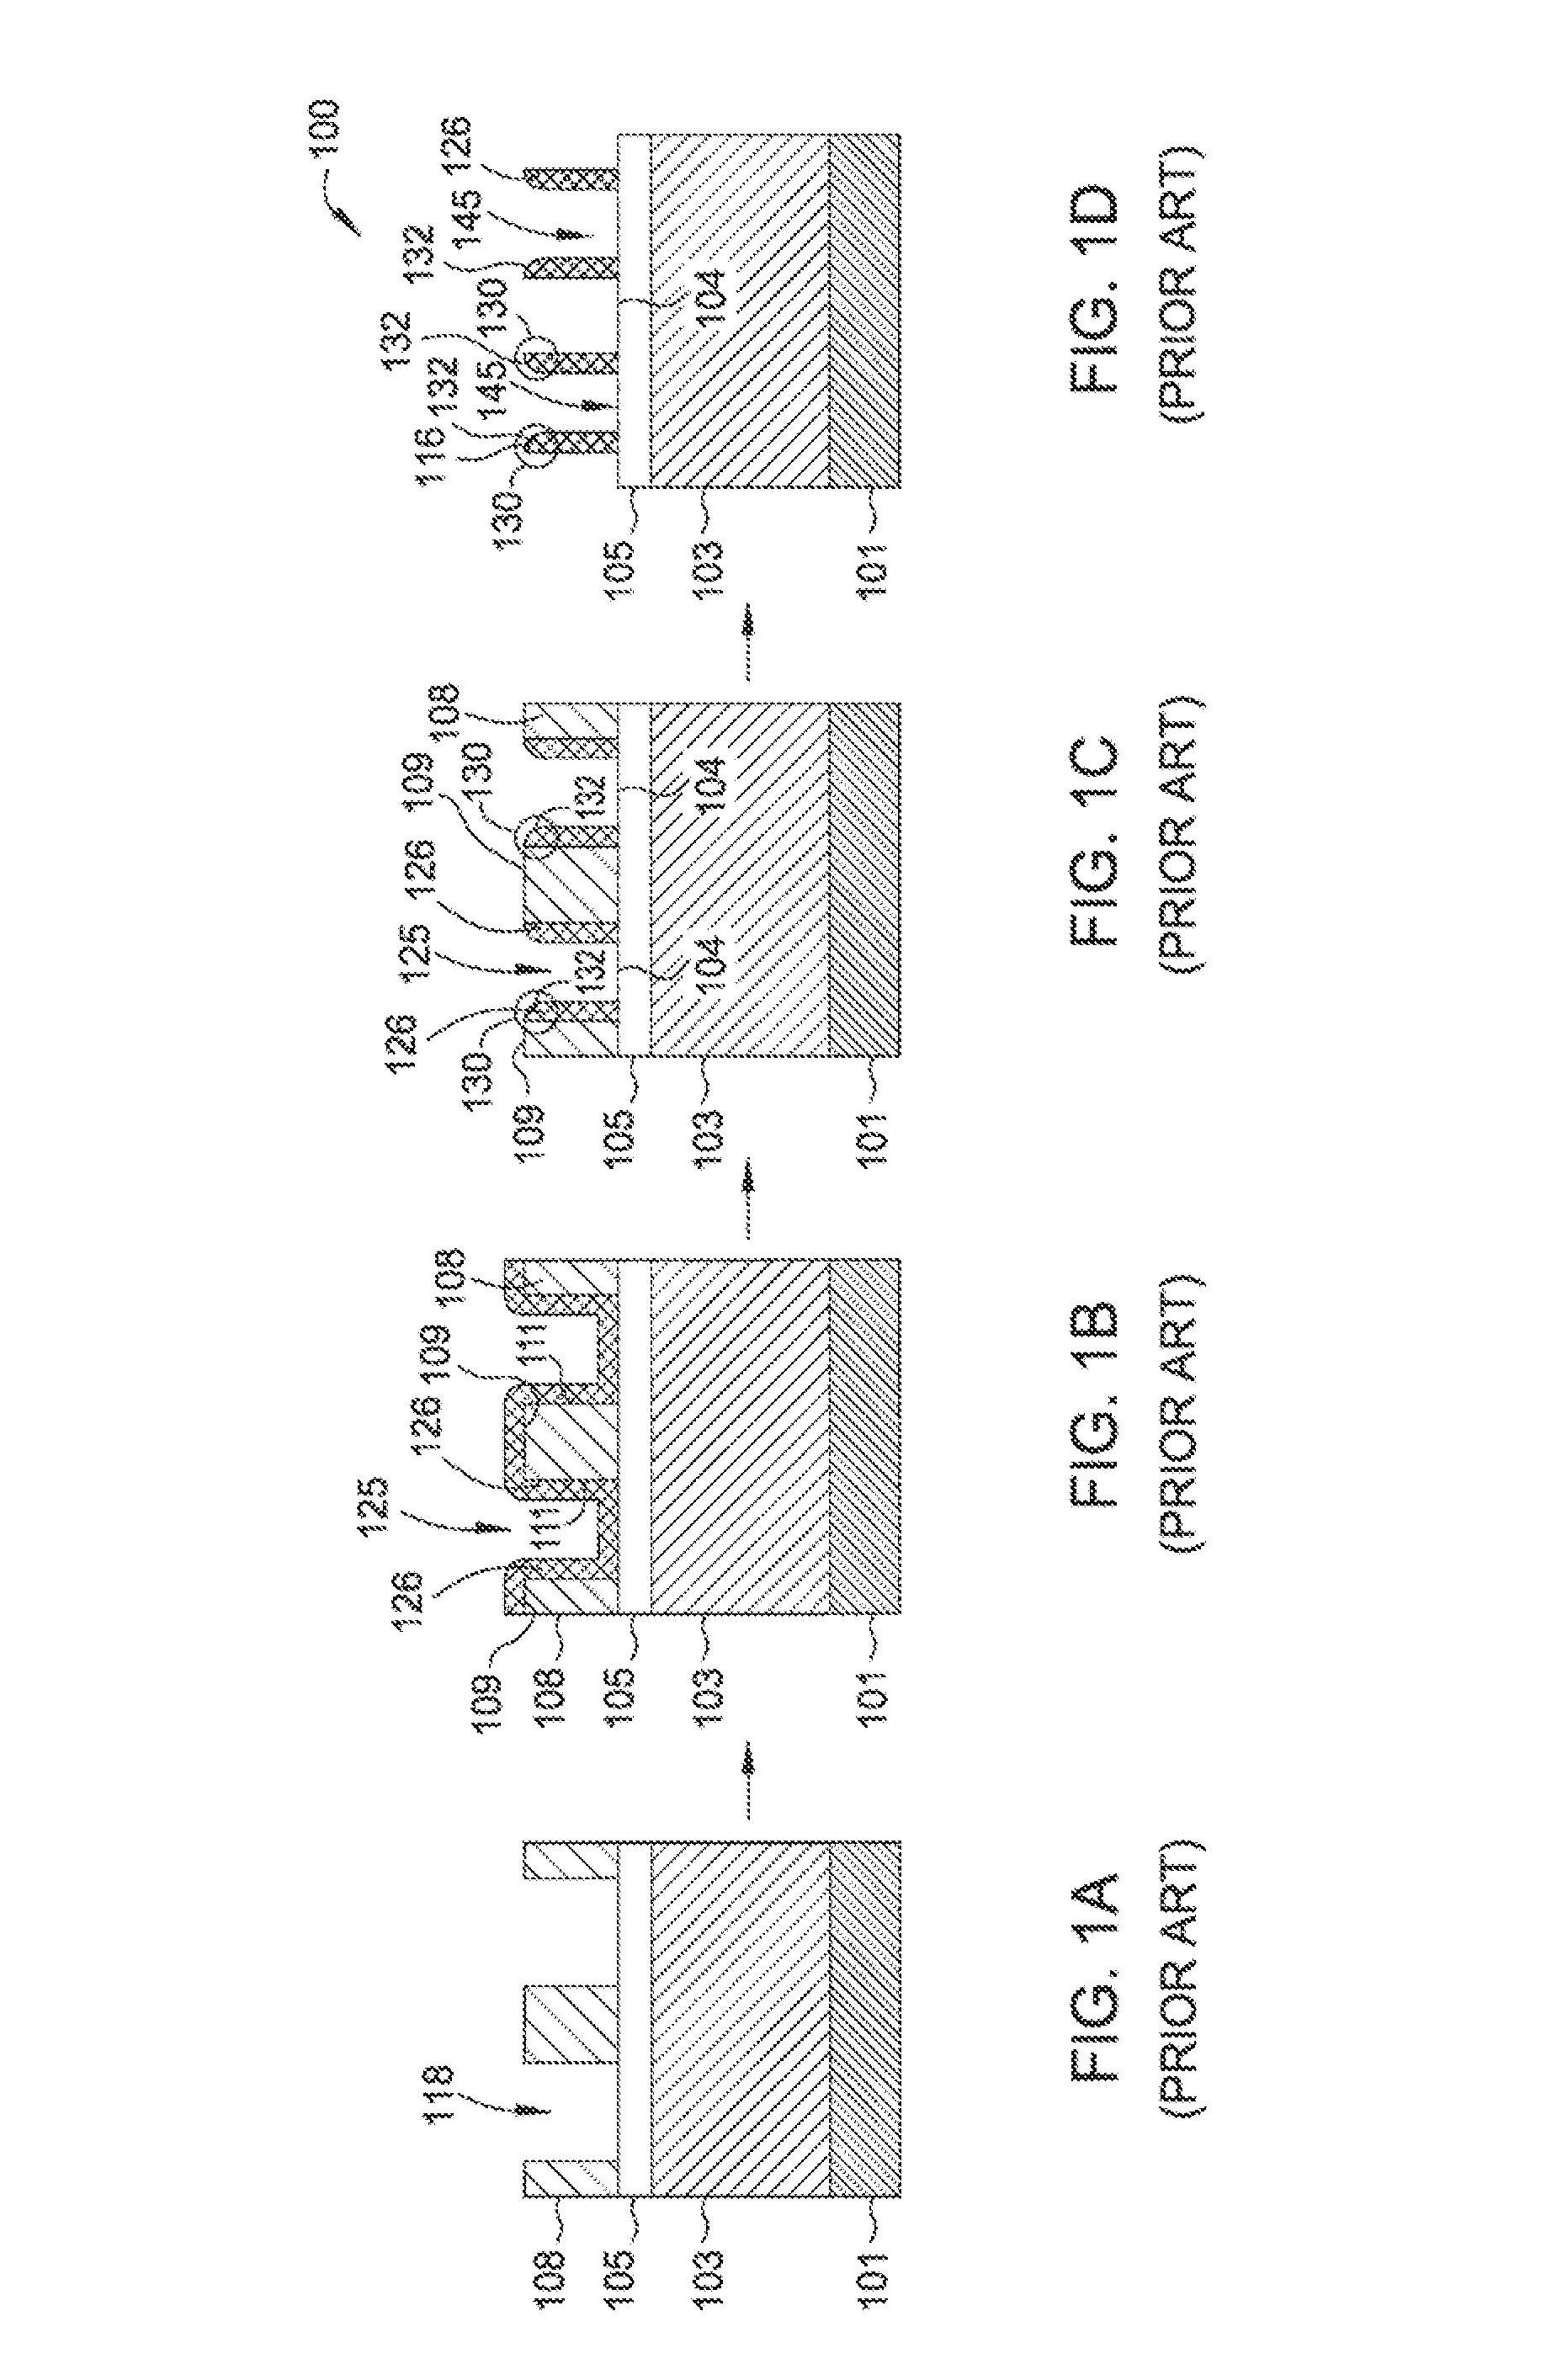 Apparatus and methods for spacer deposition and selective removal in an advanced patterning process